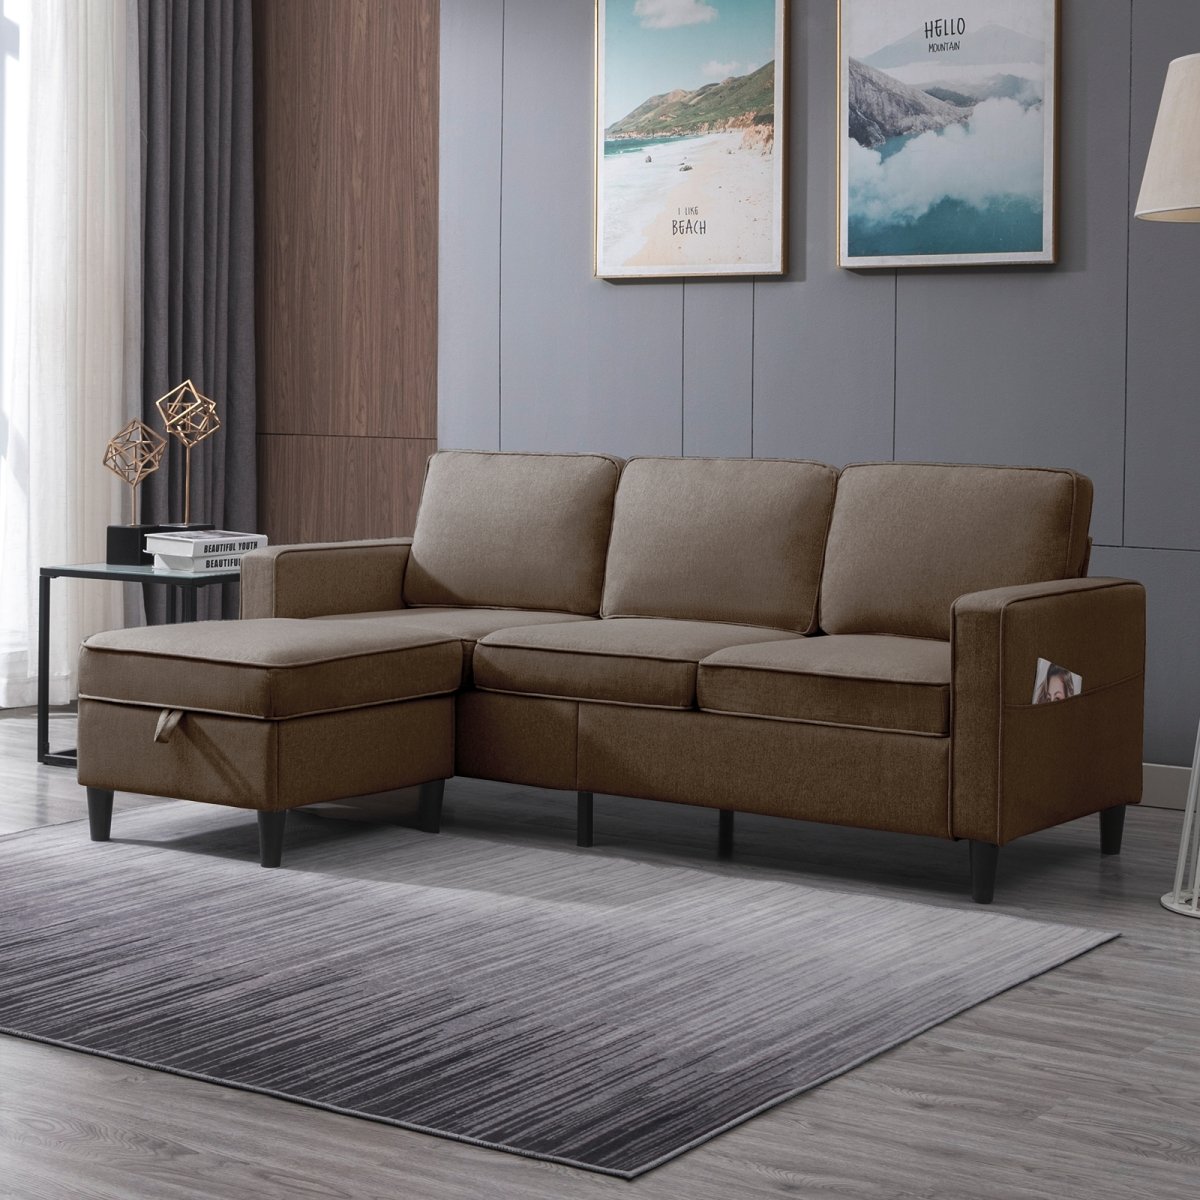 Sectional Sofa | 3-seat L-Shaped Couch with Storage Ottoman - Mjkonesectional sofa